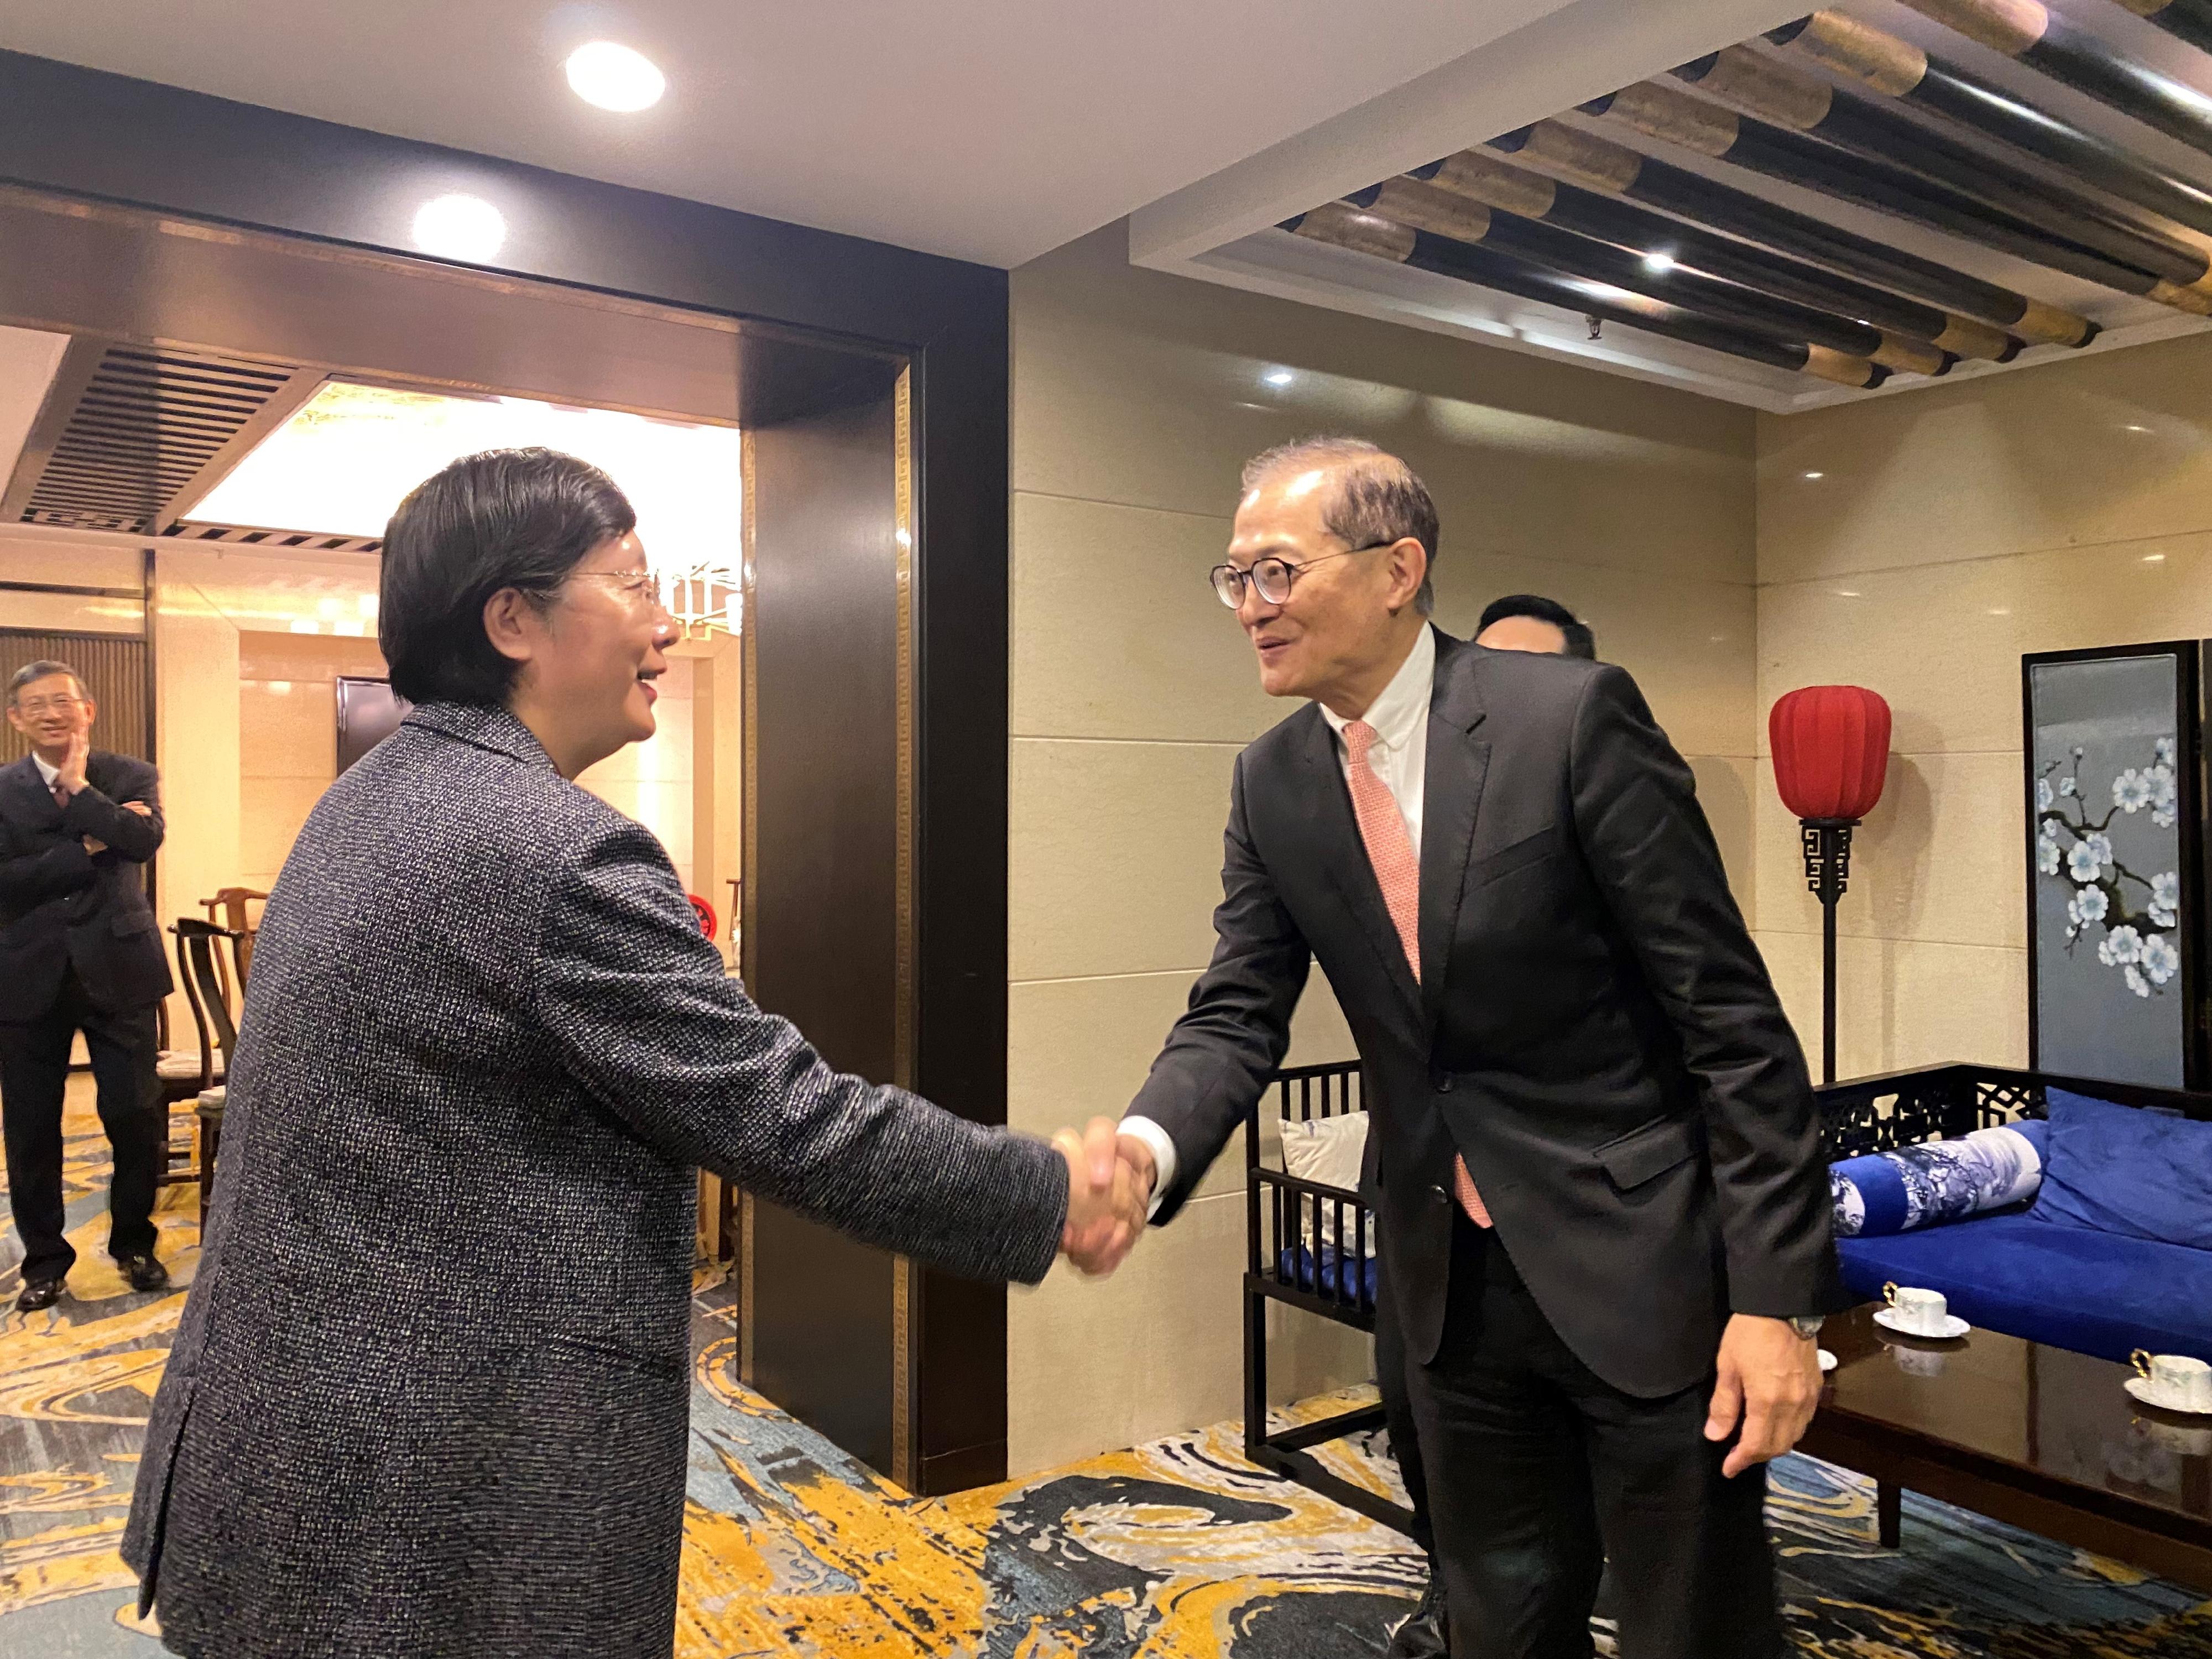 The Secretary for Health, Professor Lo Chung-mau, and his delegation visited the National Medical Products Administration (NMPA) today (March 17). Photo shows Professor Lo (right) shaking hands with the NMPA Commissioner, Ms Jiao Hong (left).
